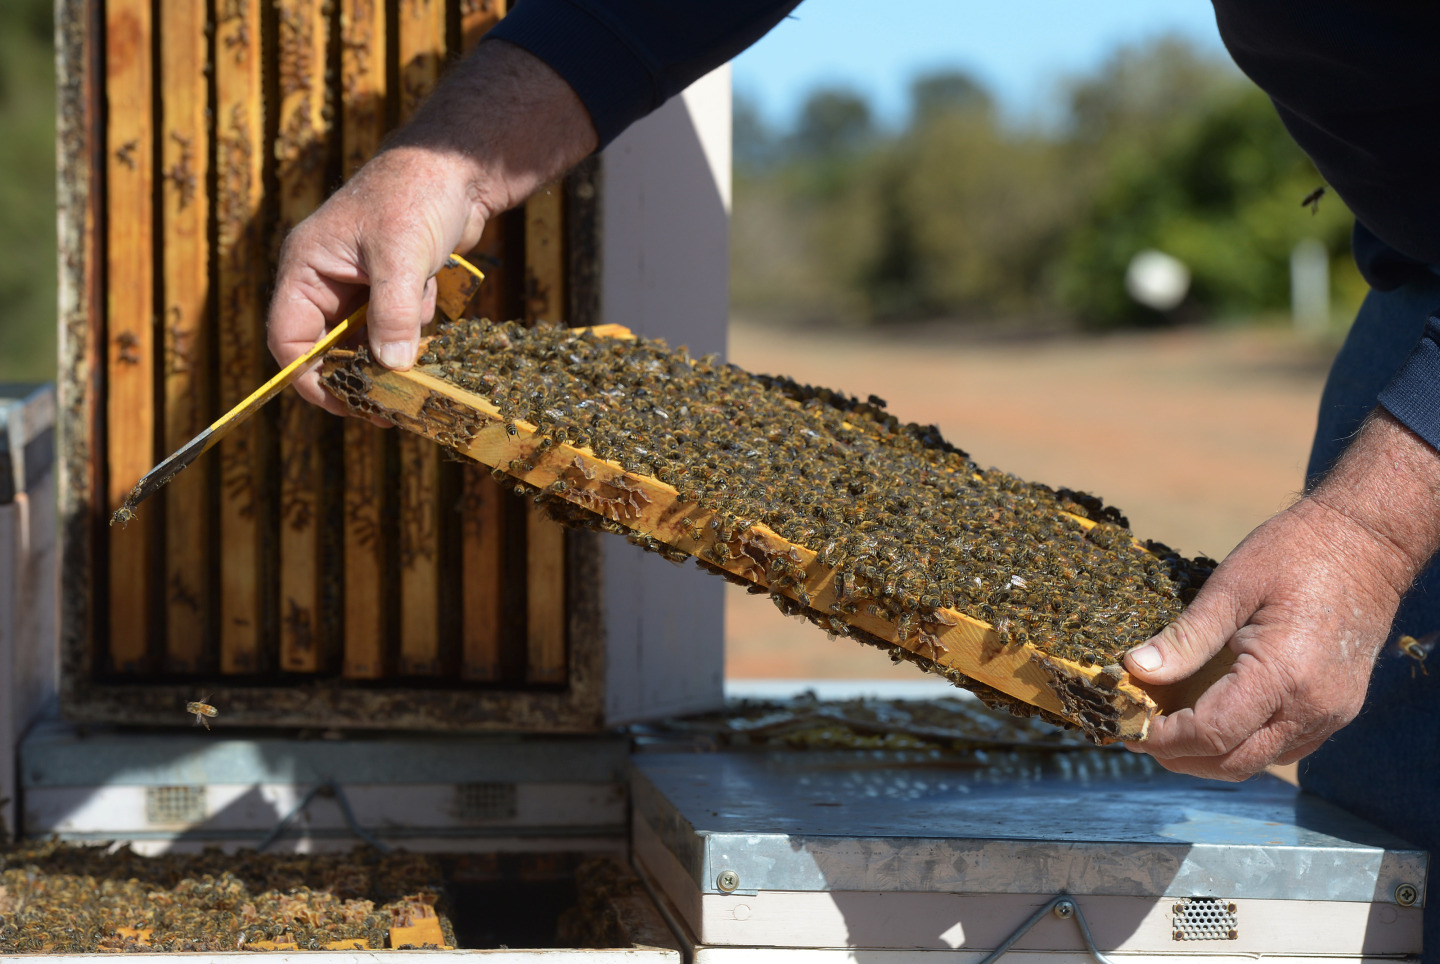 A beekeeper inspects a segment of a beehive in Australia.